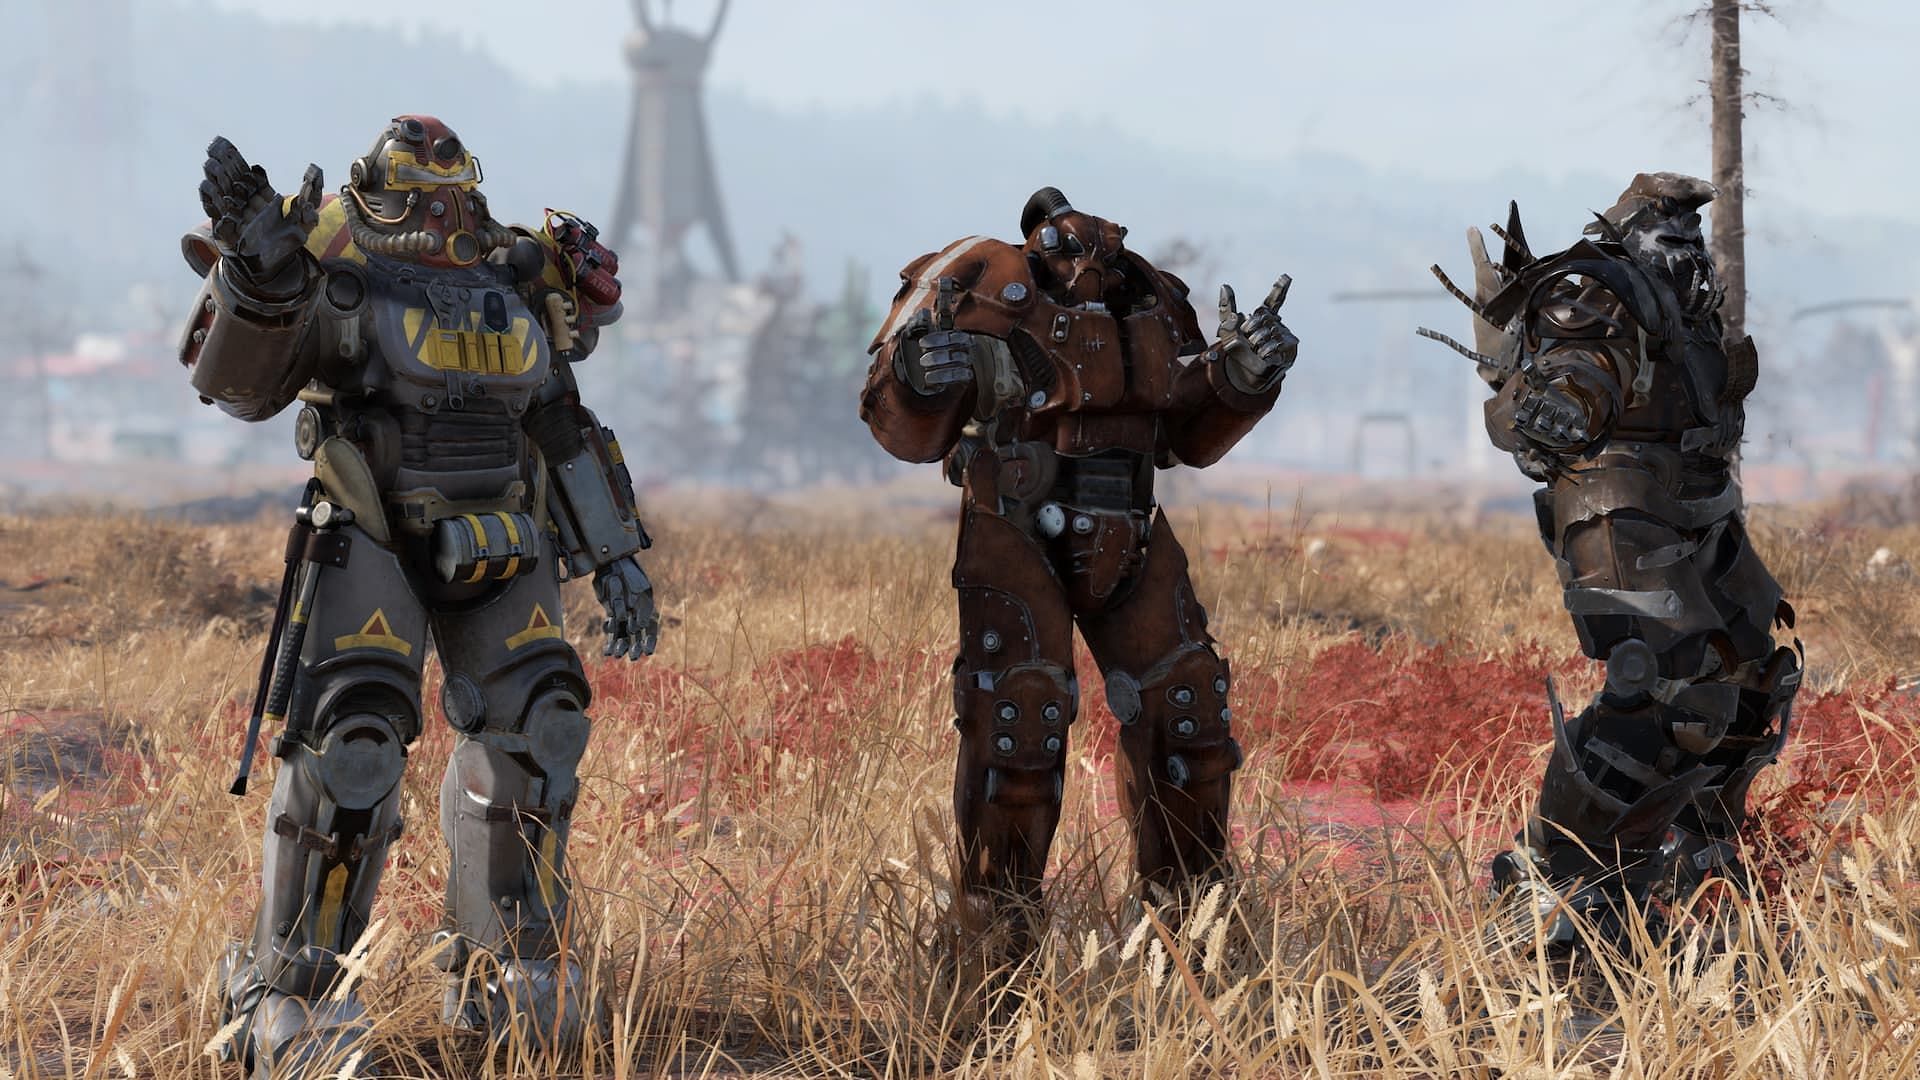 Fallout 76 is best enjoyed with friends (Image via Bethesda Game Studios)